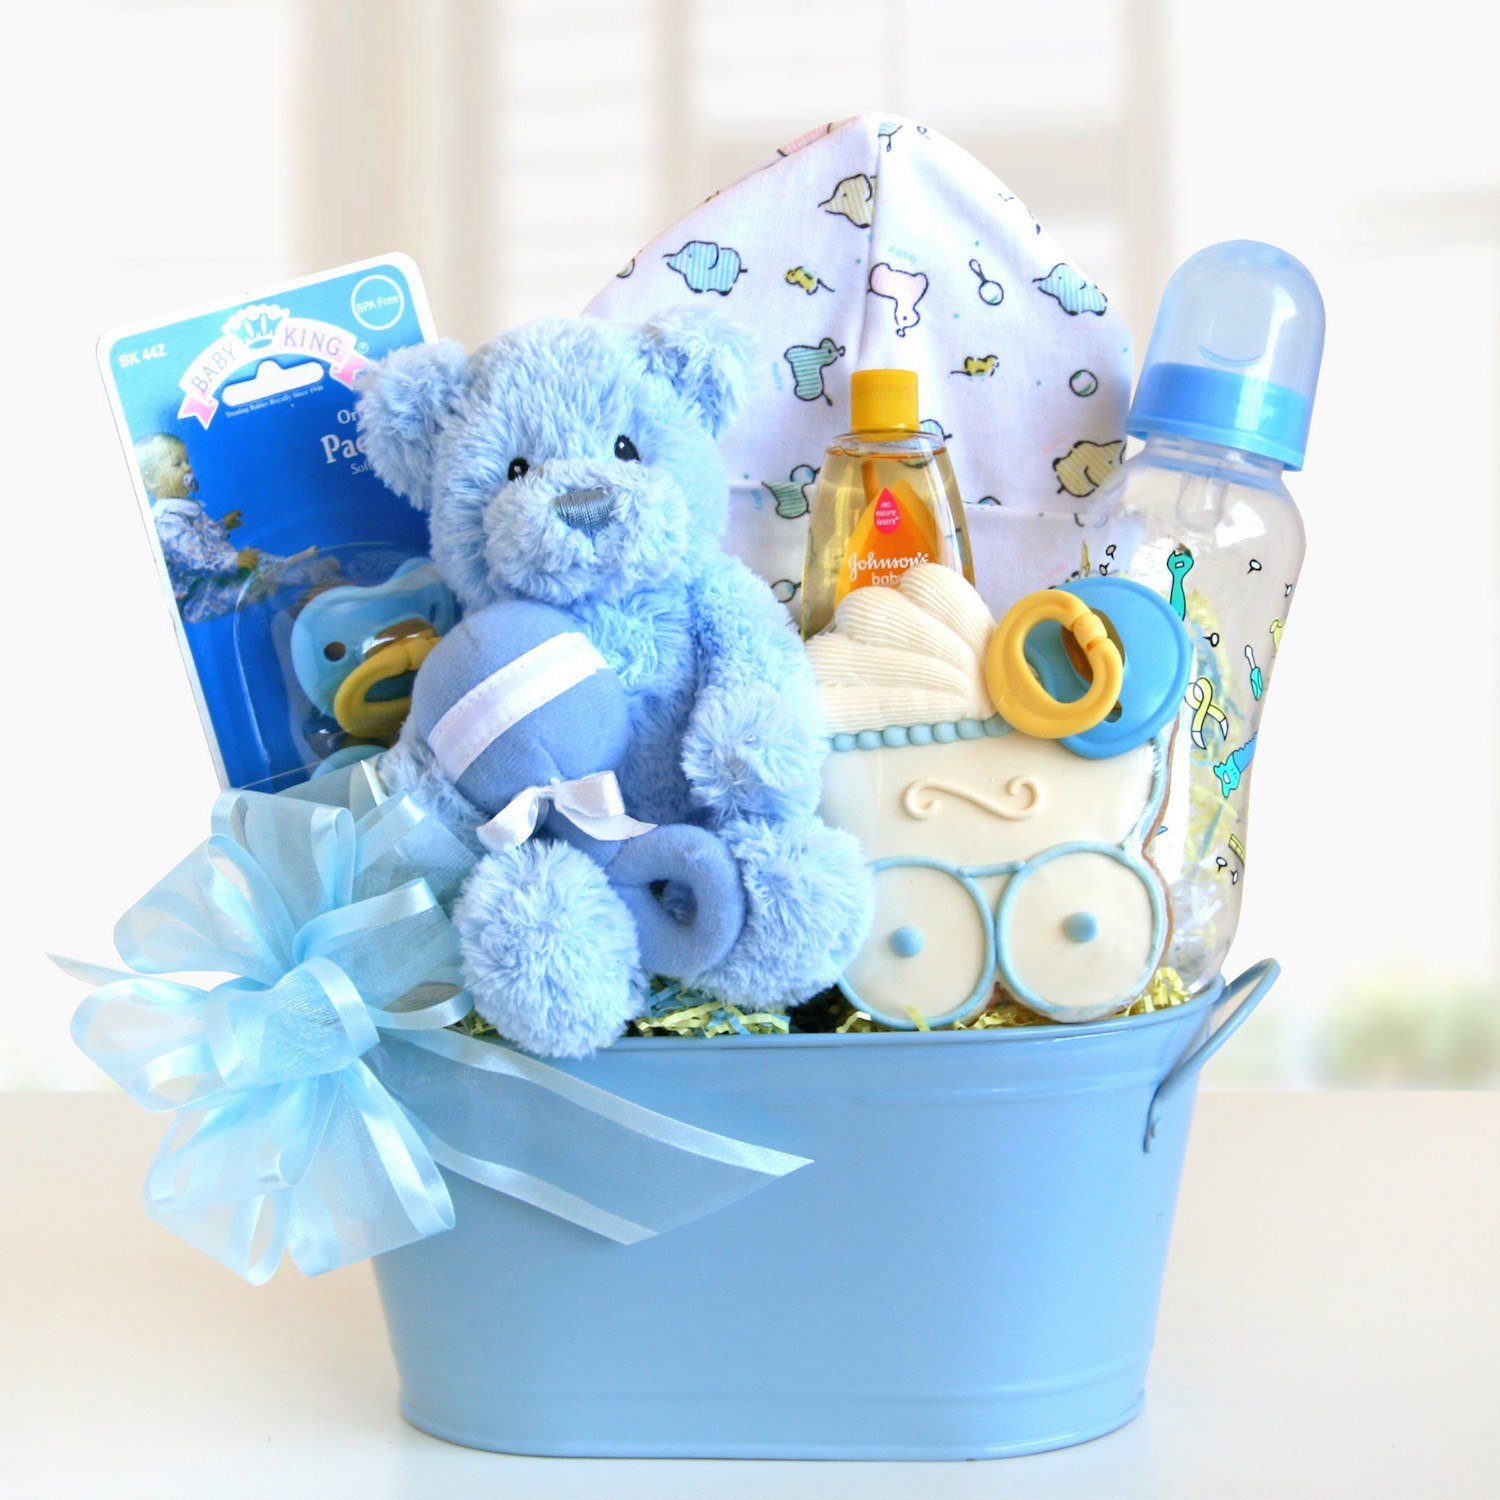 New Born Baby Gift Basket
 Sweet and Cuddly Baby Boy Gift Basket Gift Baskets Plus